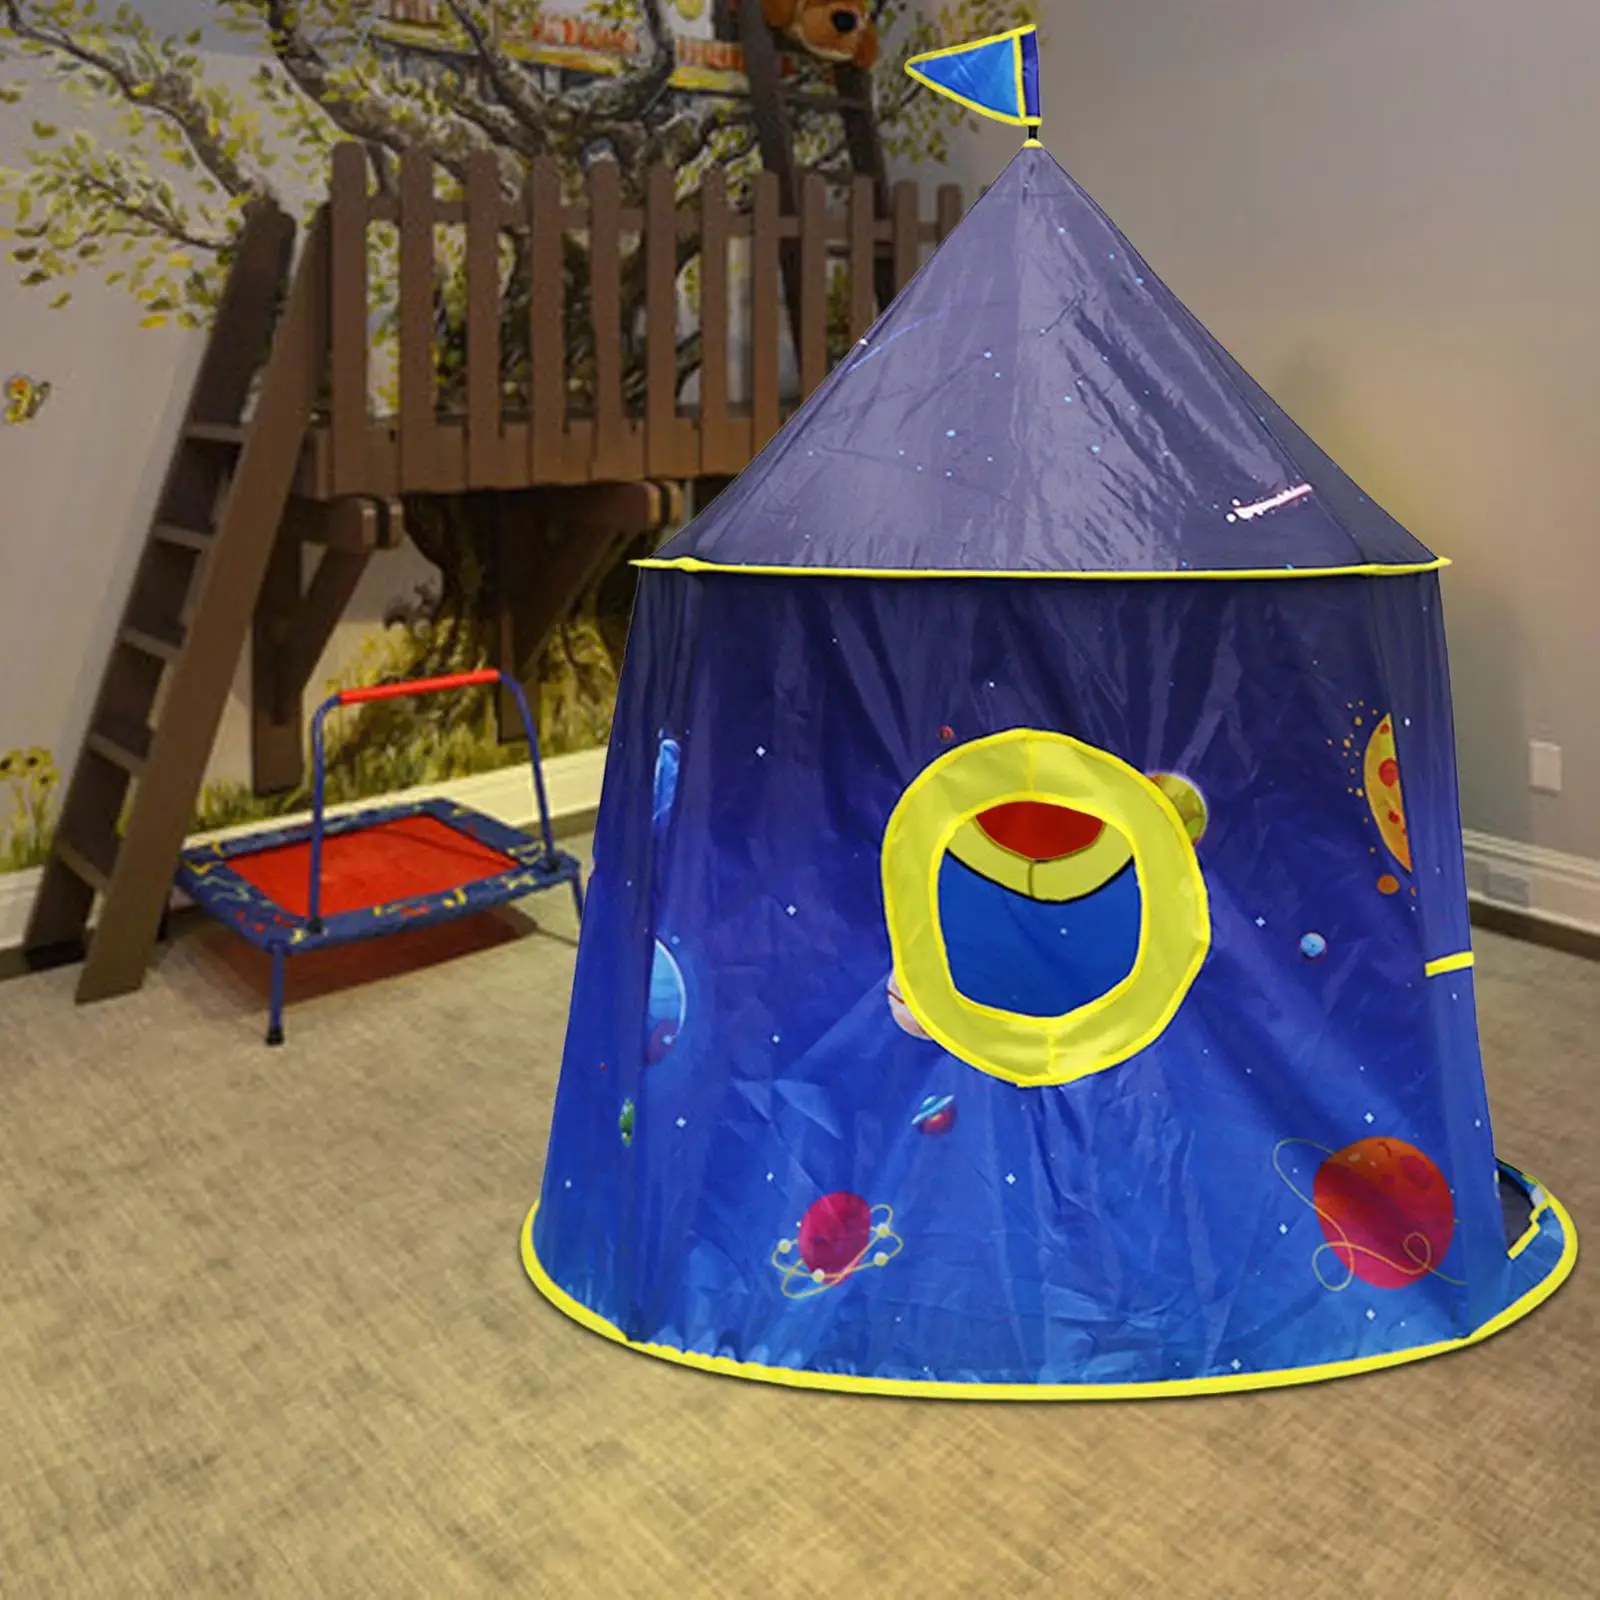 Space Themed Children Play Tent Kids Play House Portable Outer Space Rocket Foldable Playhouse Tent for Outdoor Boy Girl Gifts